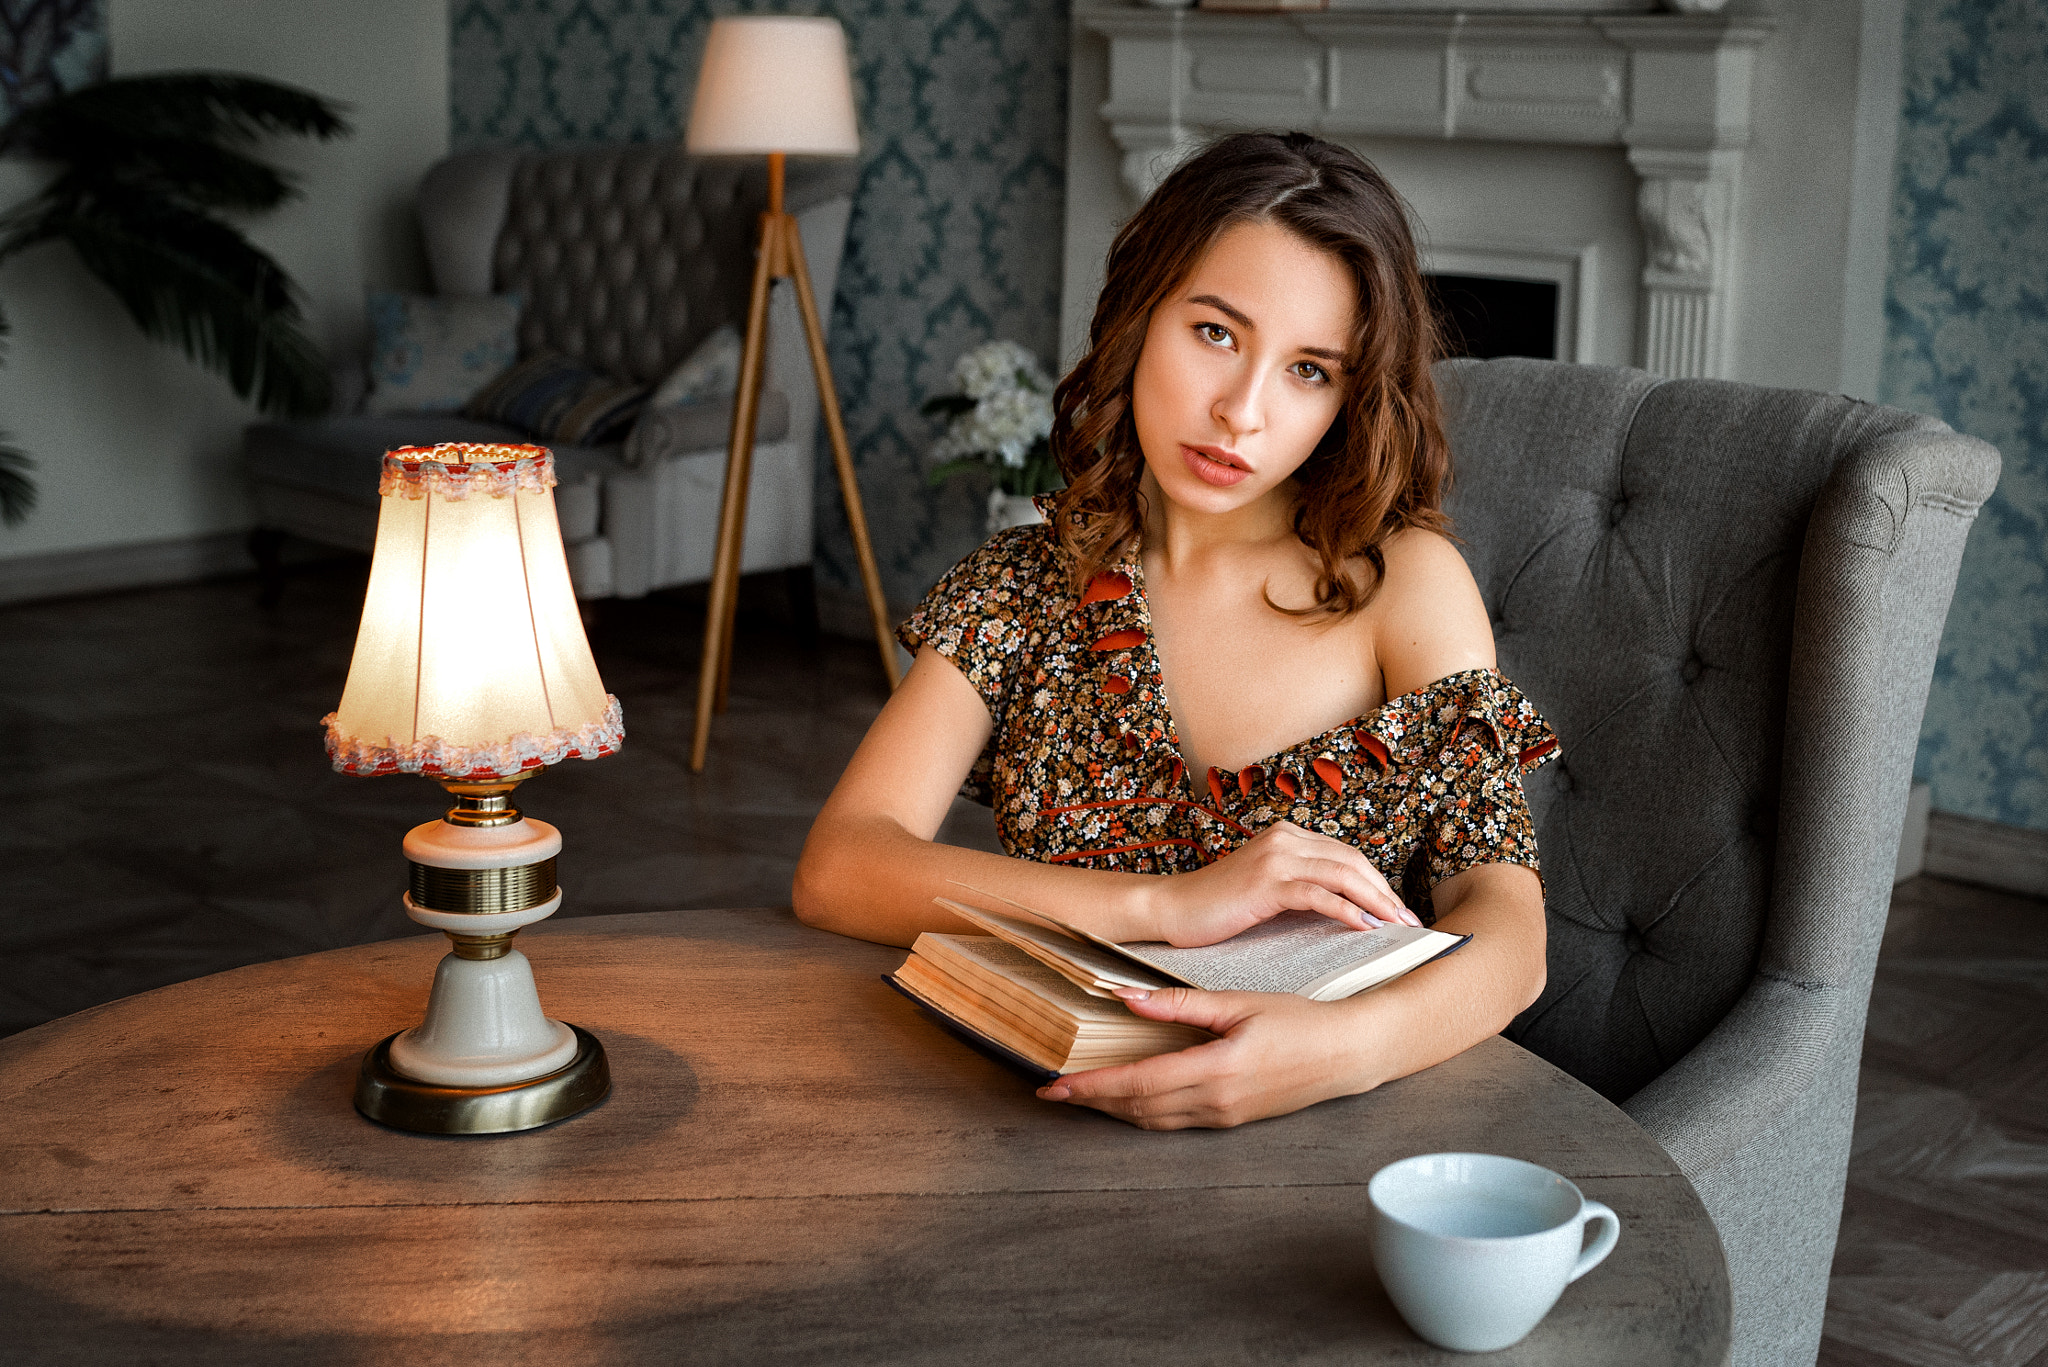 People 2048x1367 women sitting lamp table cup portrait books women indoors no bra bare shoulders flower dress looking at viewer